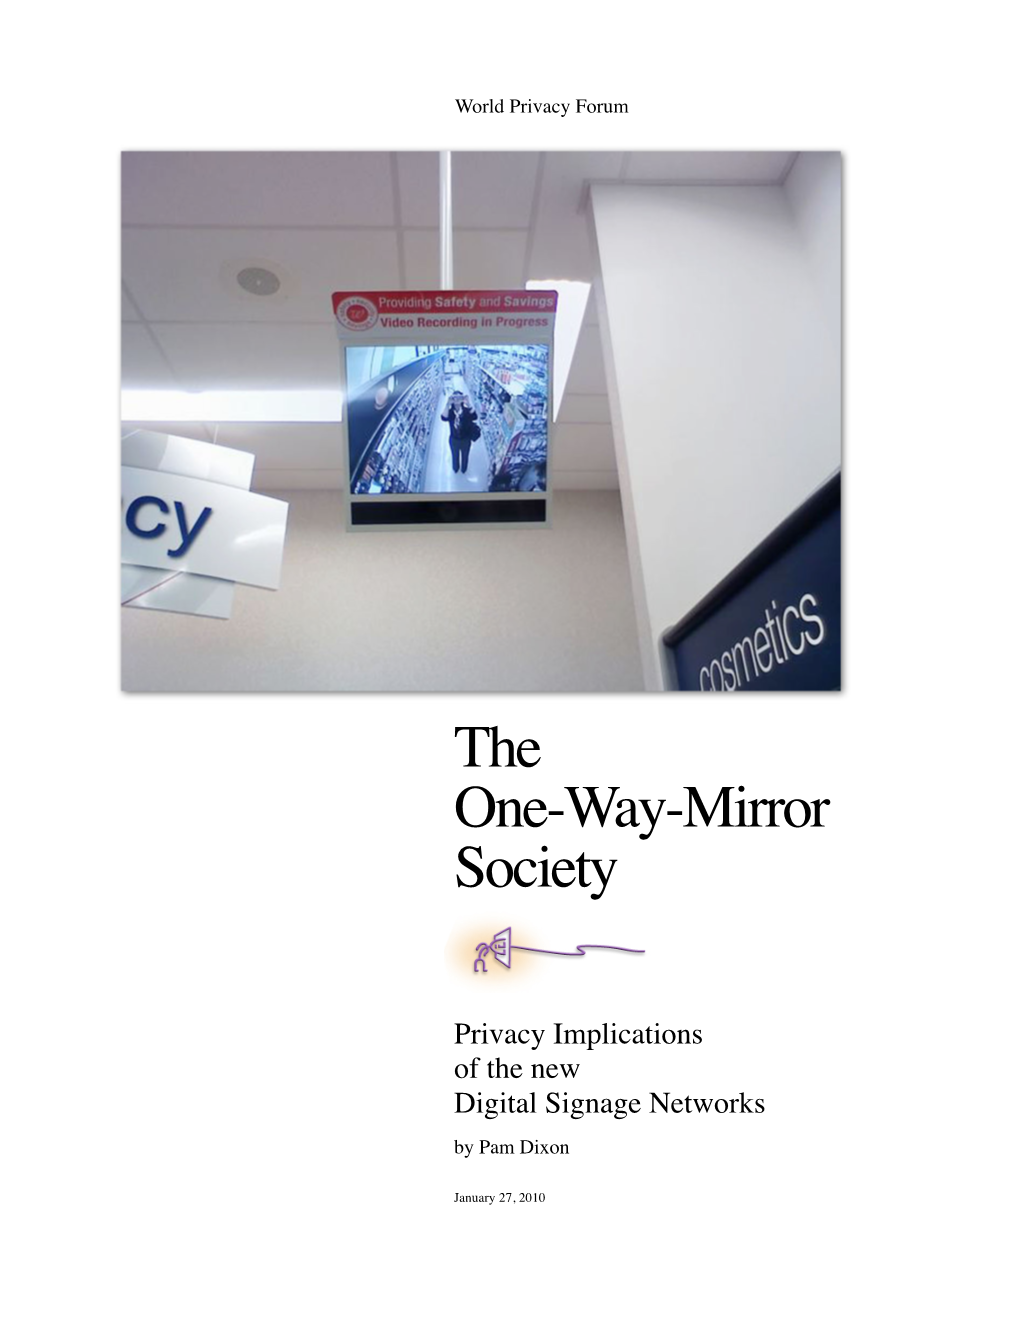 Download the One-Way Mirror Society